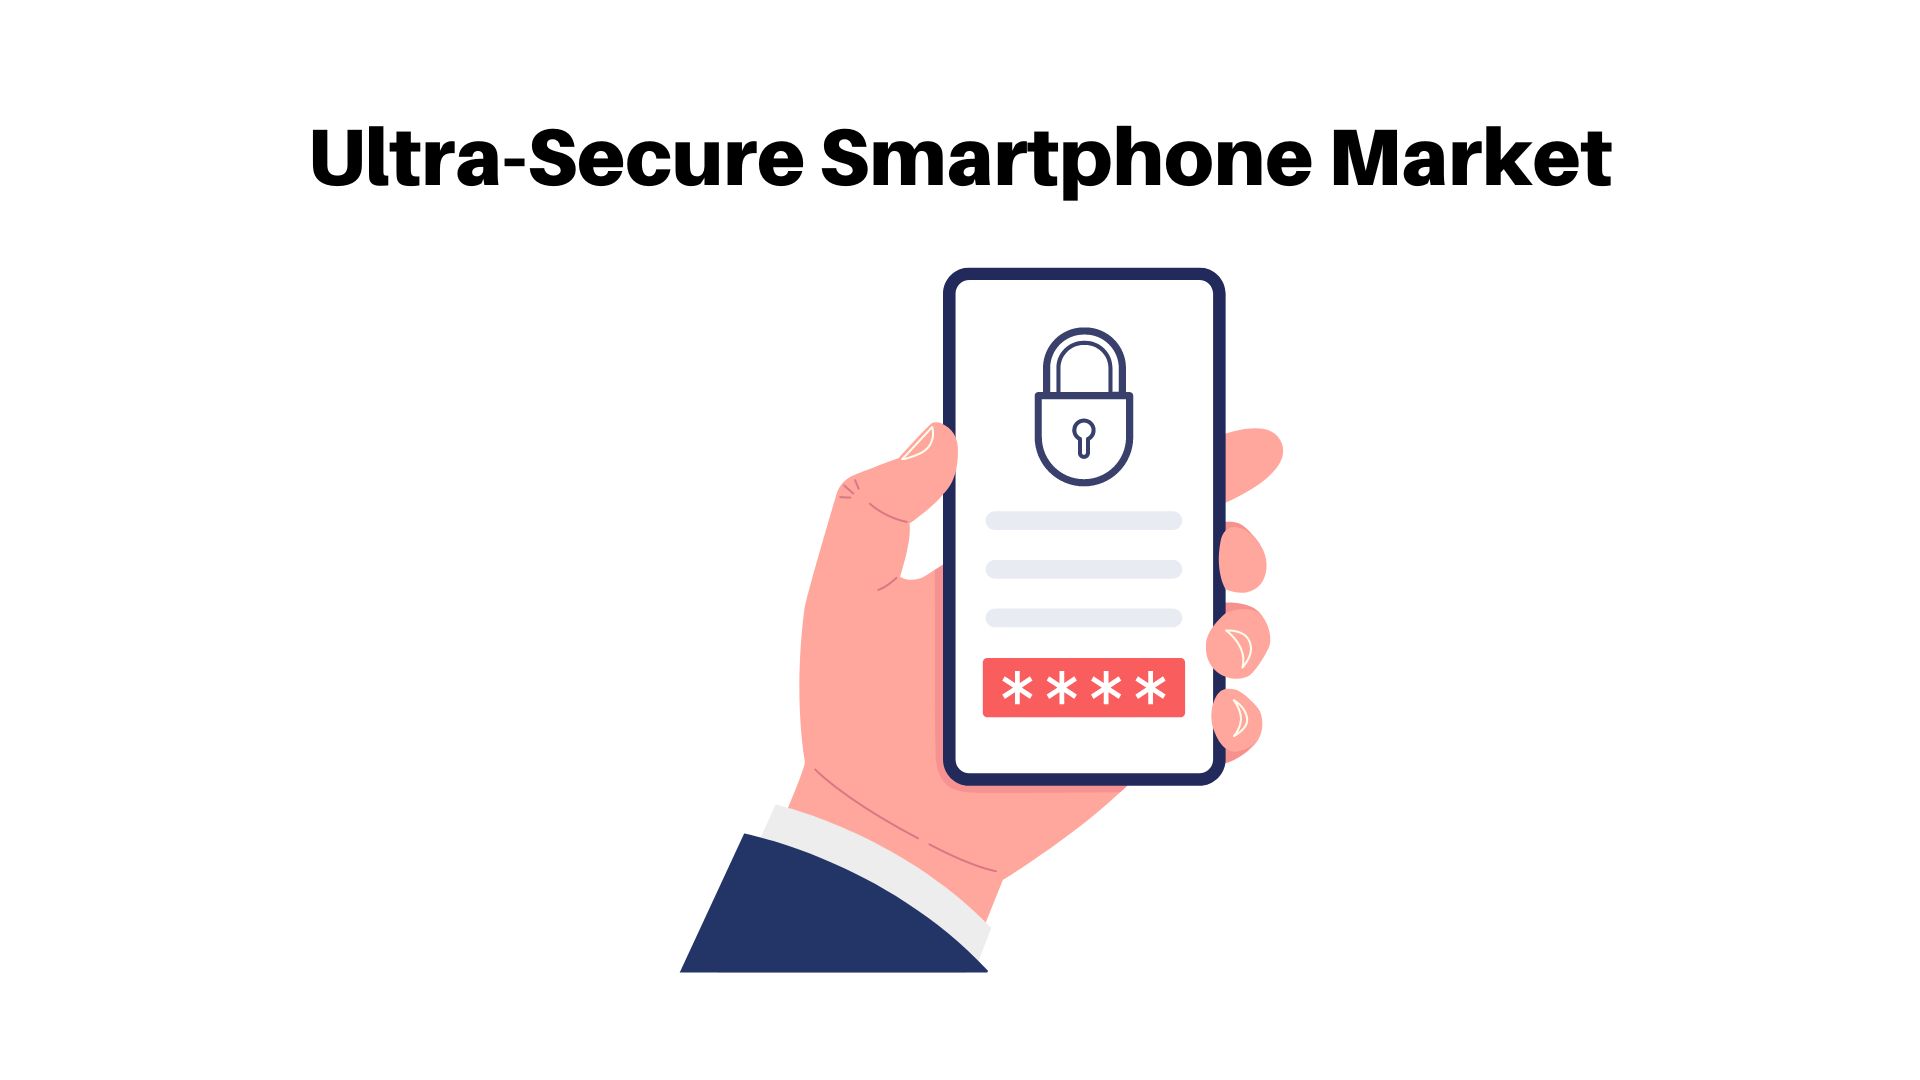 Ultra-Secure Smartphone Market to Reach USD 16.6 Billion by 2032, Says Market.us Research Study